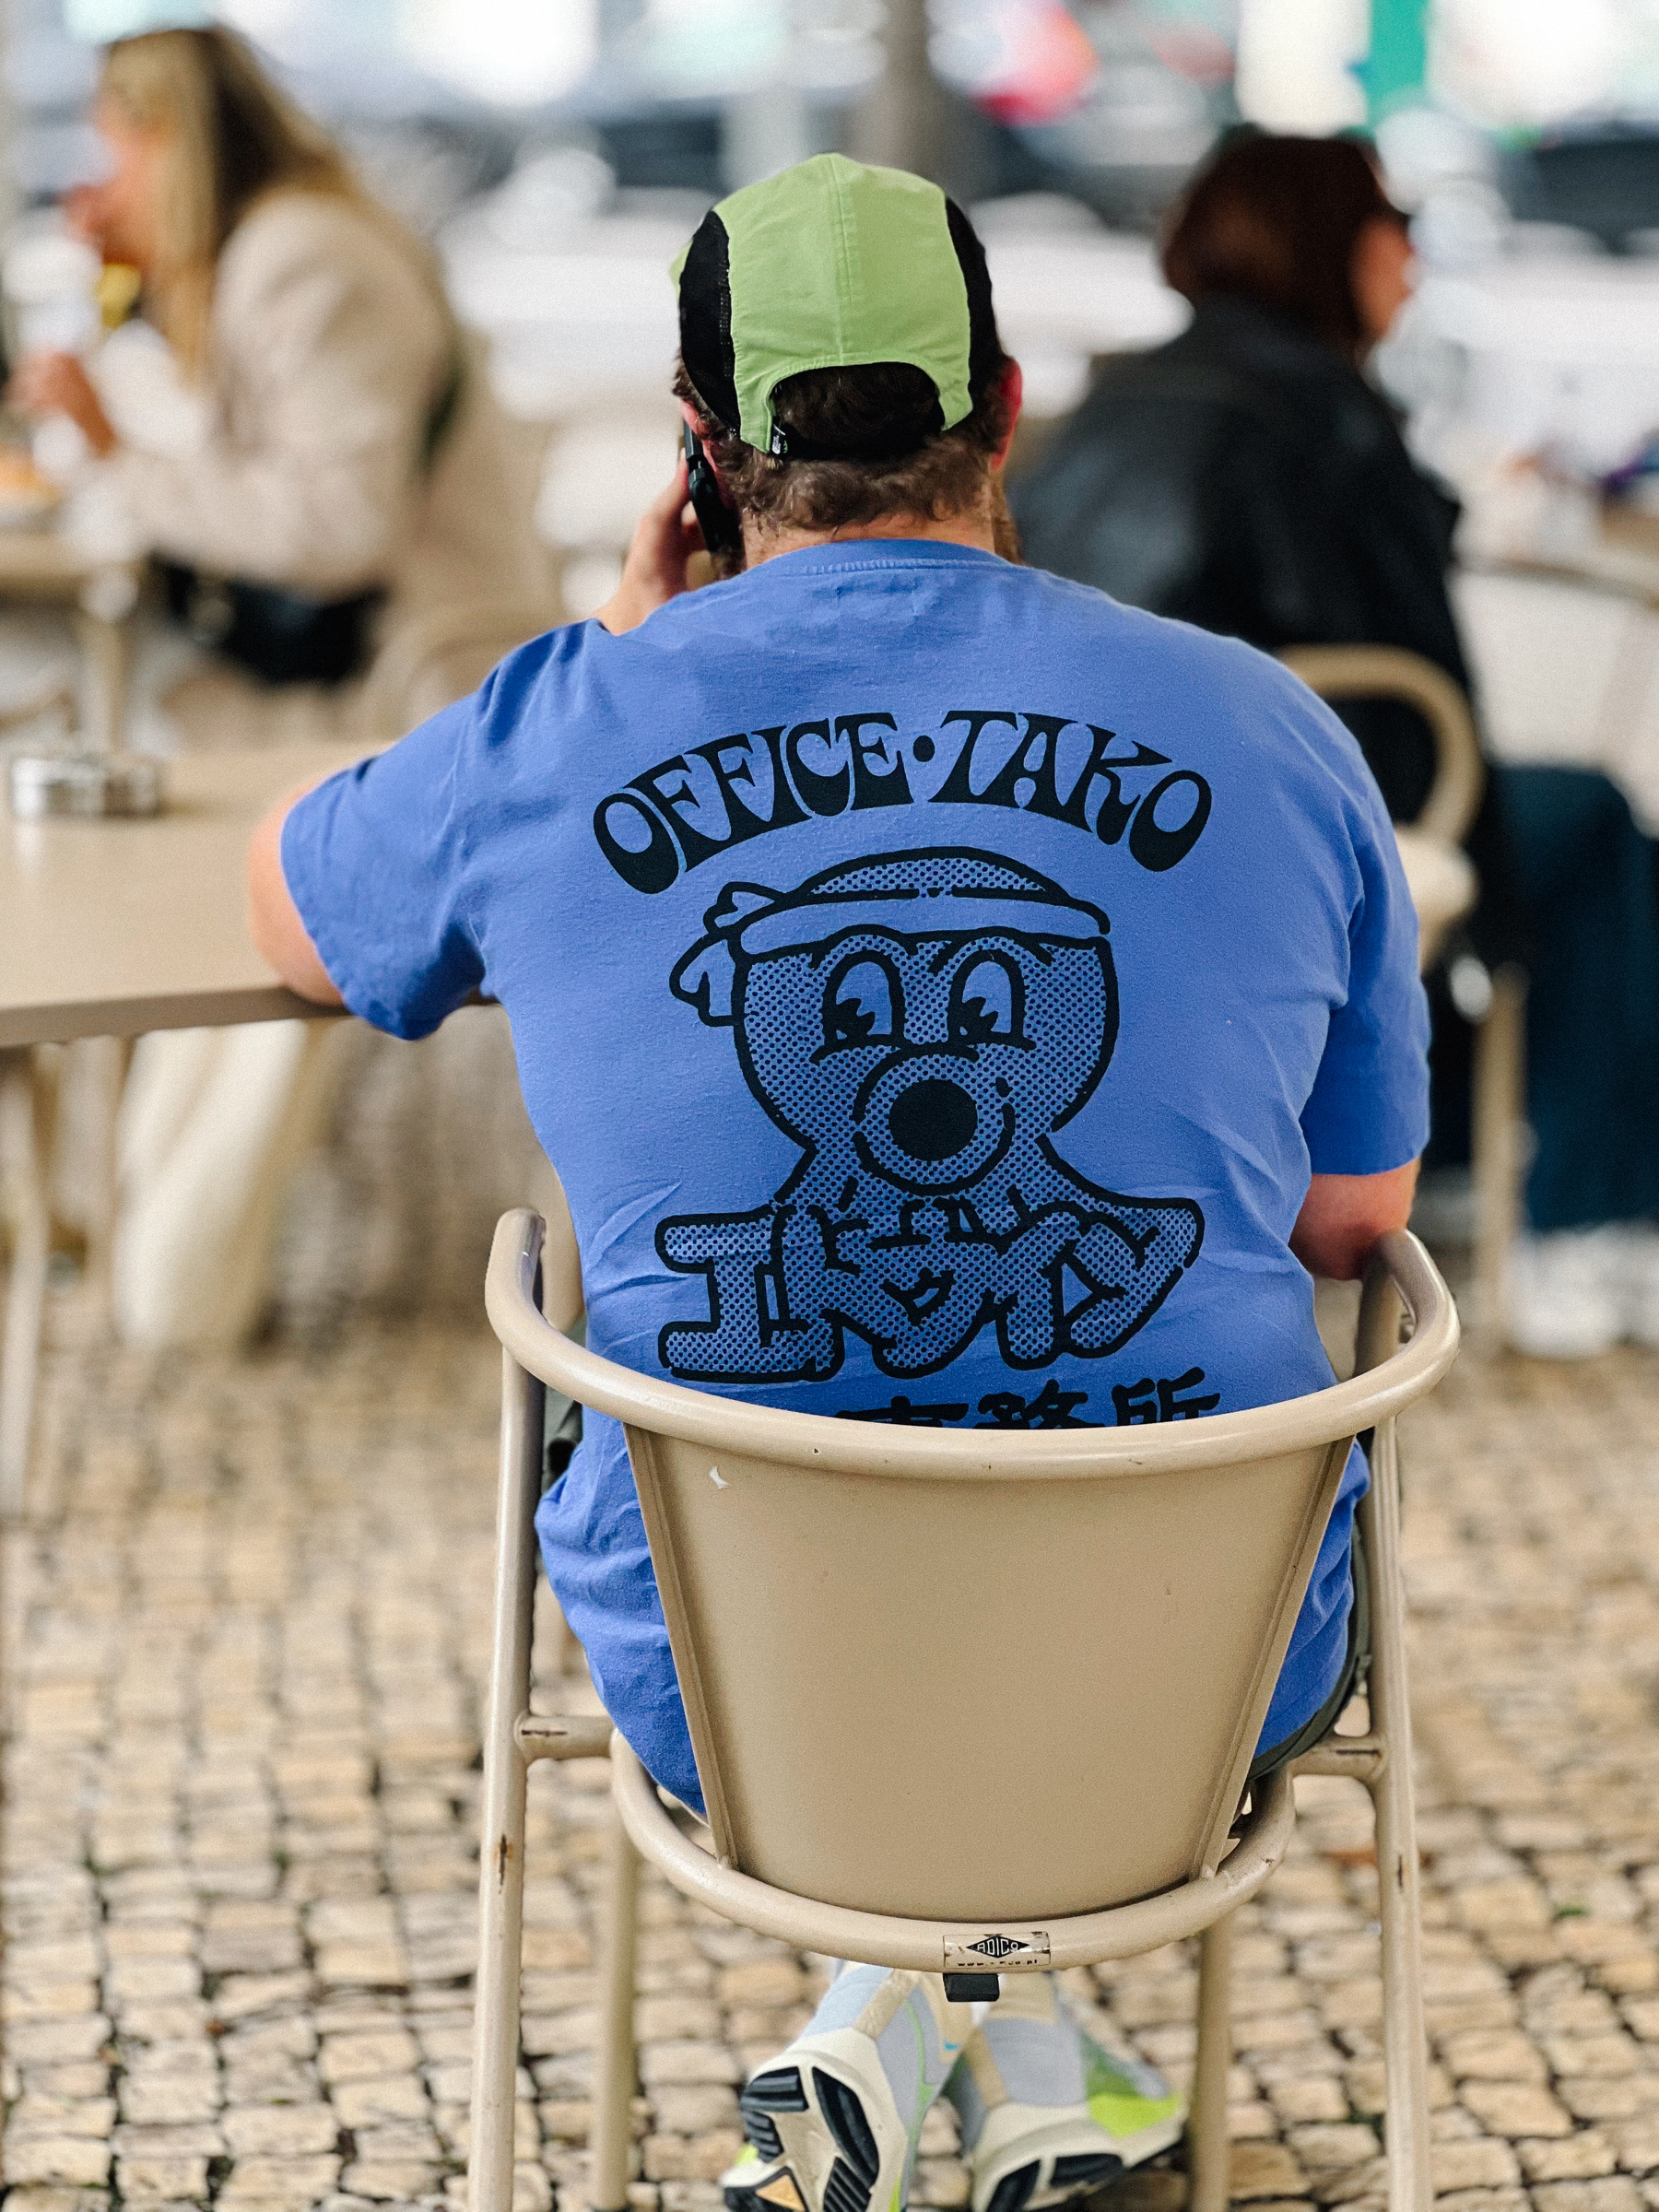 An hipster, complete with cycling cap, sits at a cafe, wearing an &ldquo;office-tako&rdquo; t-shirt, from Edwin.